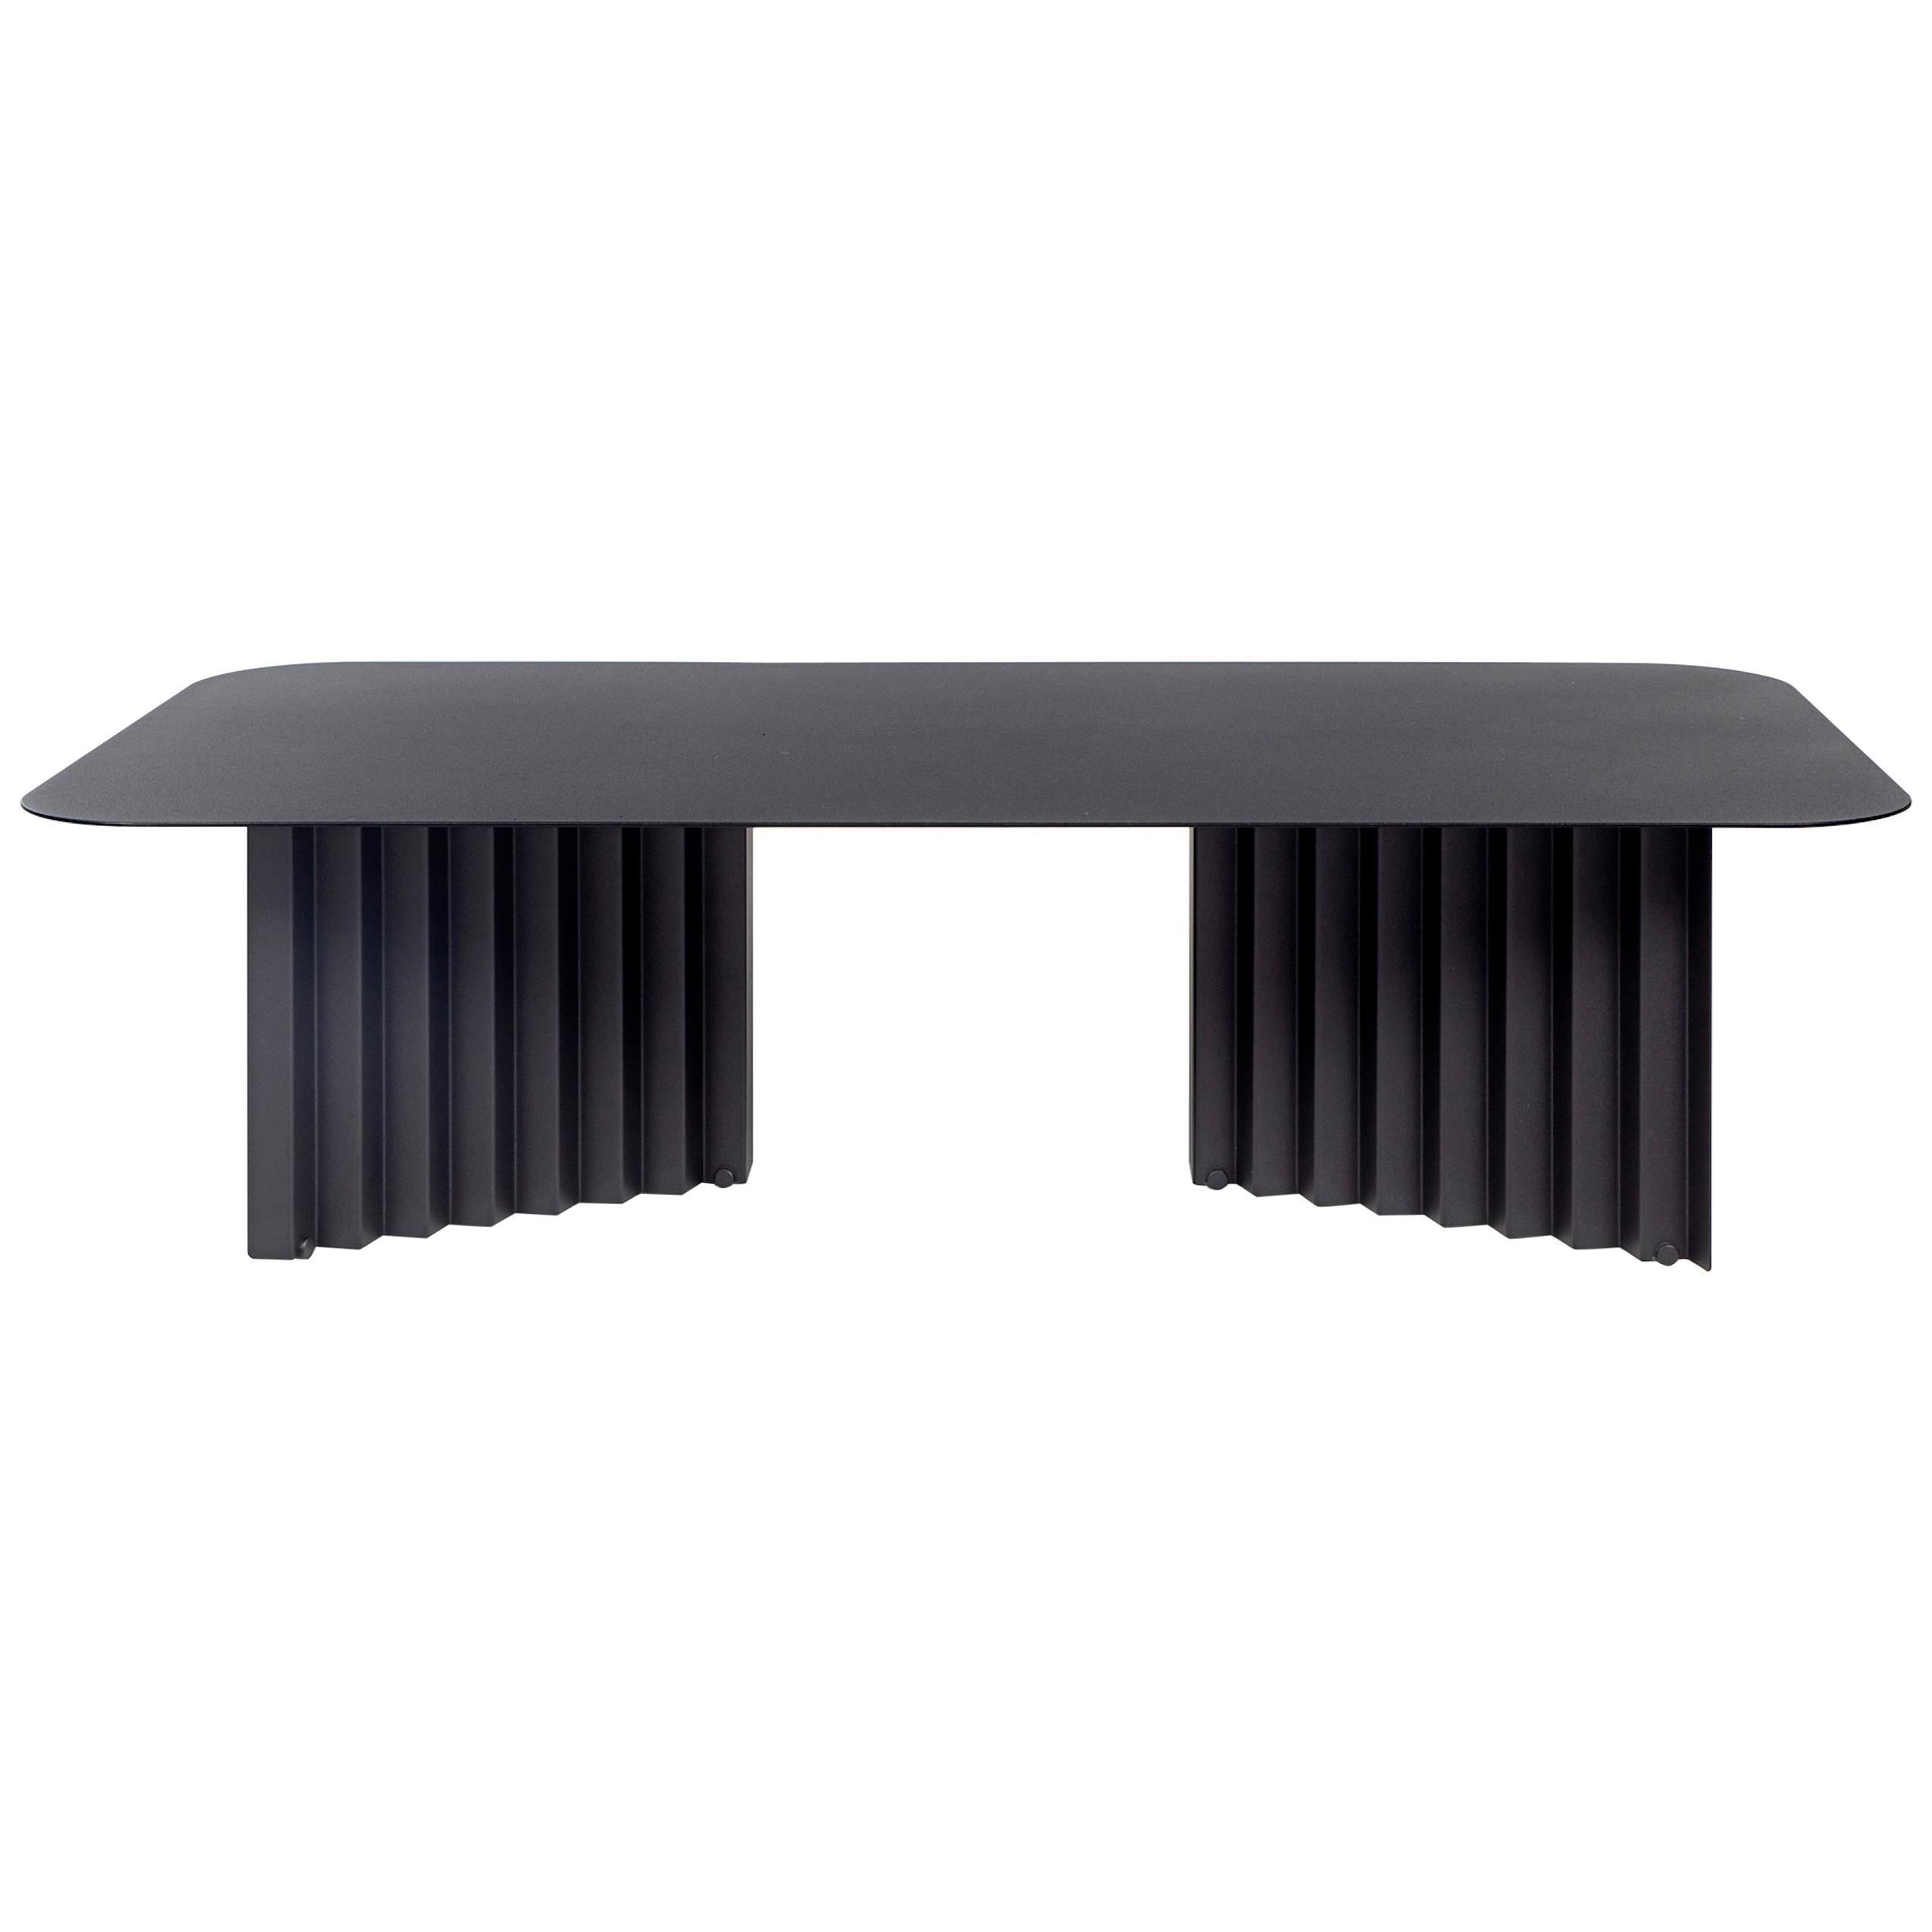 RS Barcelona Plec Large Table in Black Metal by A.P.O.